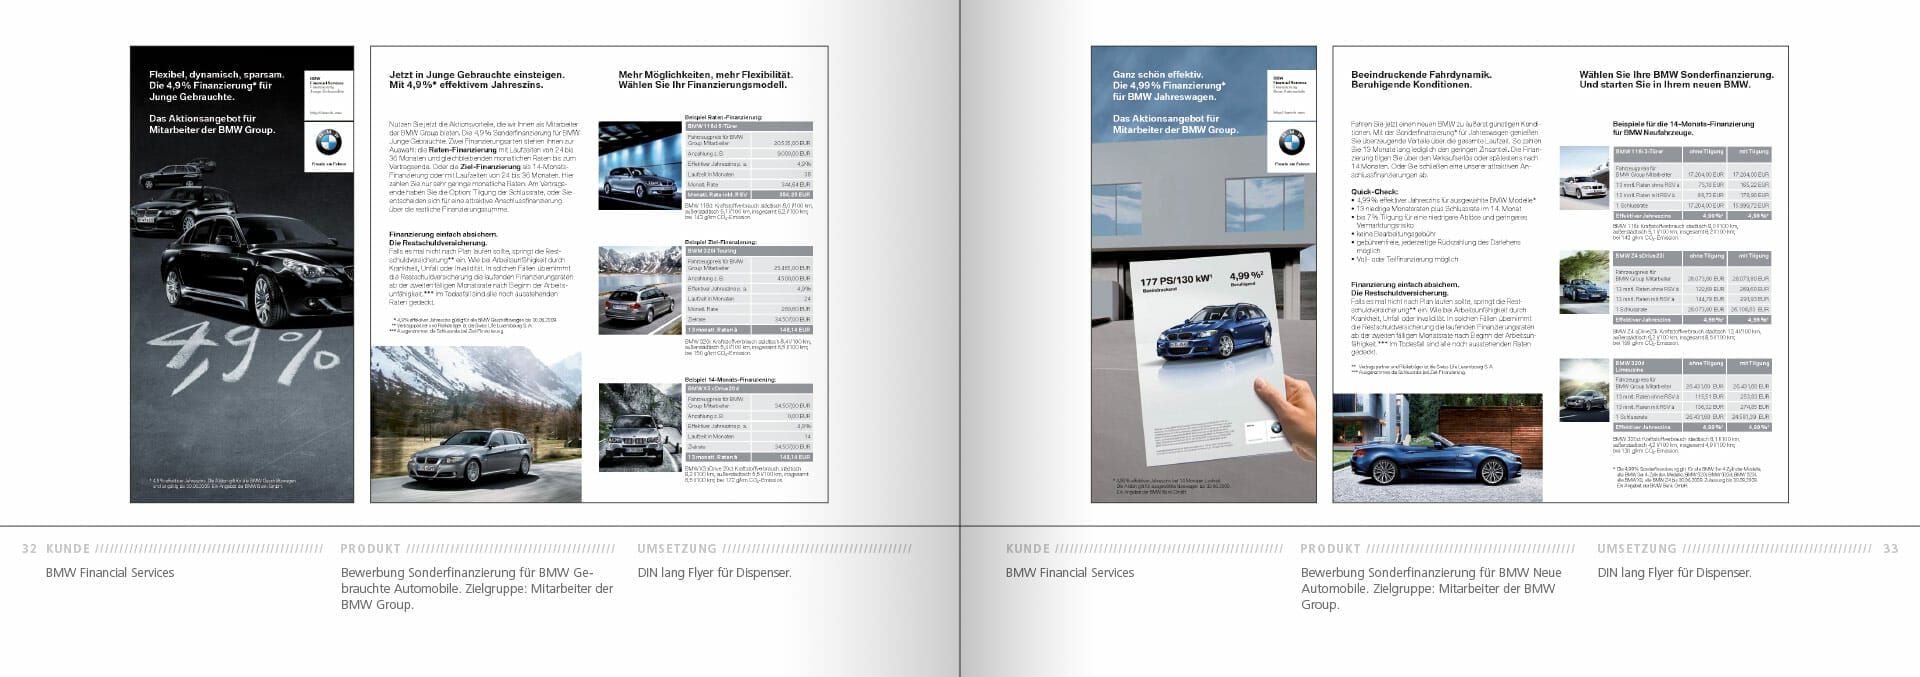 BMW Group Works 2001-2009 Booklet 32-33